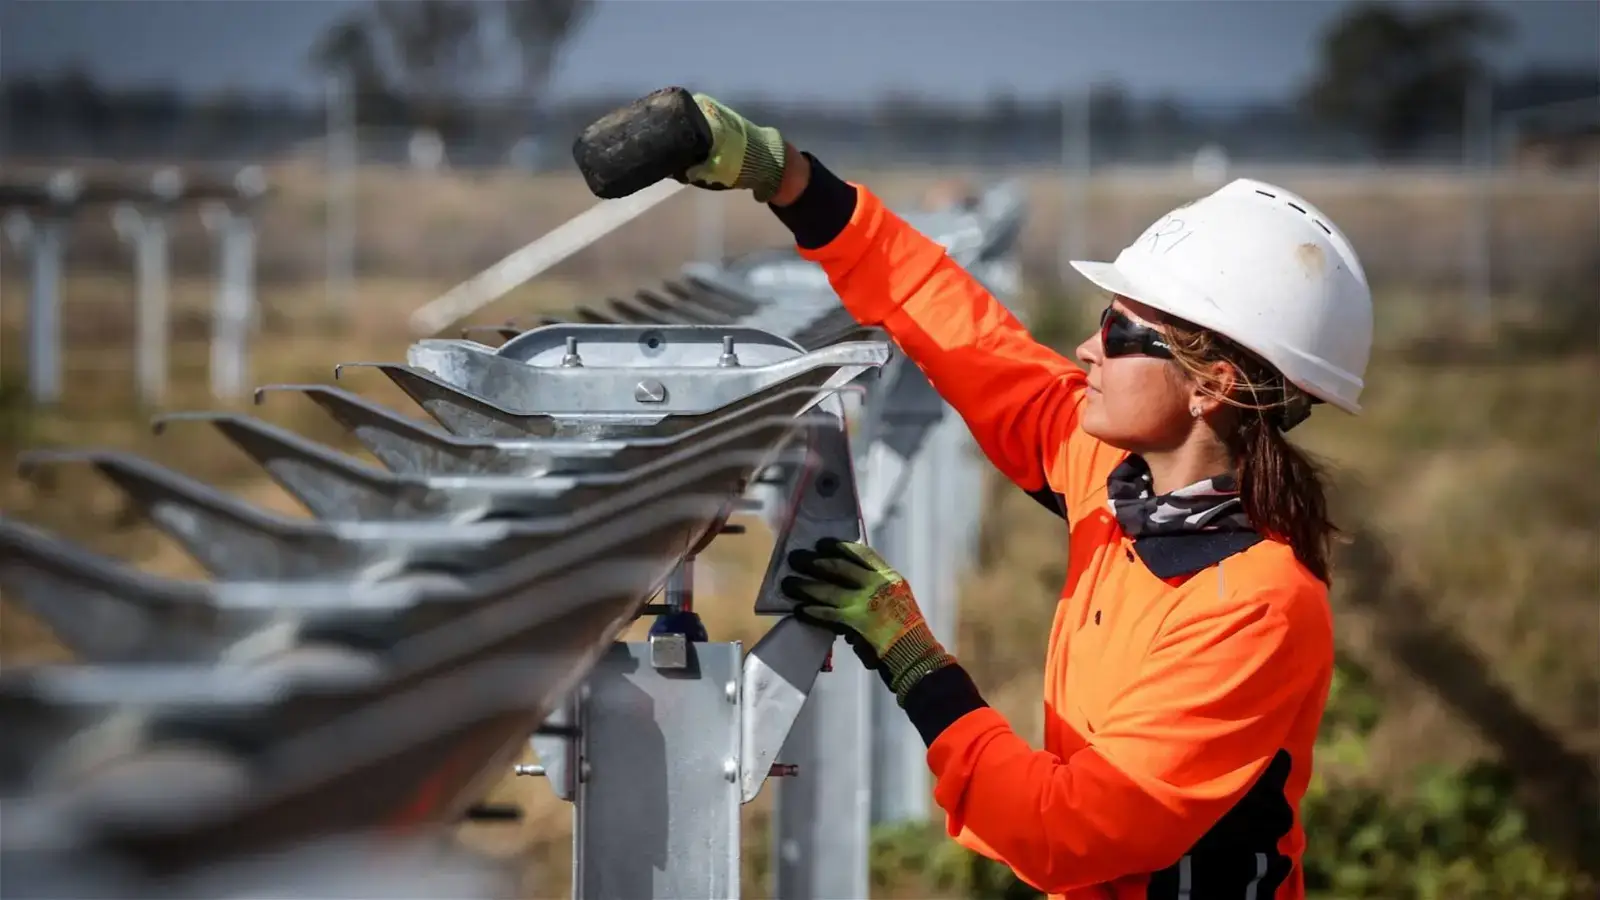 Green energy groups step up training to close skills gap